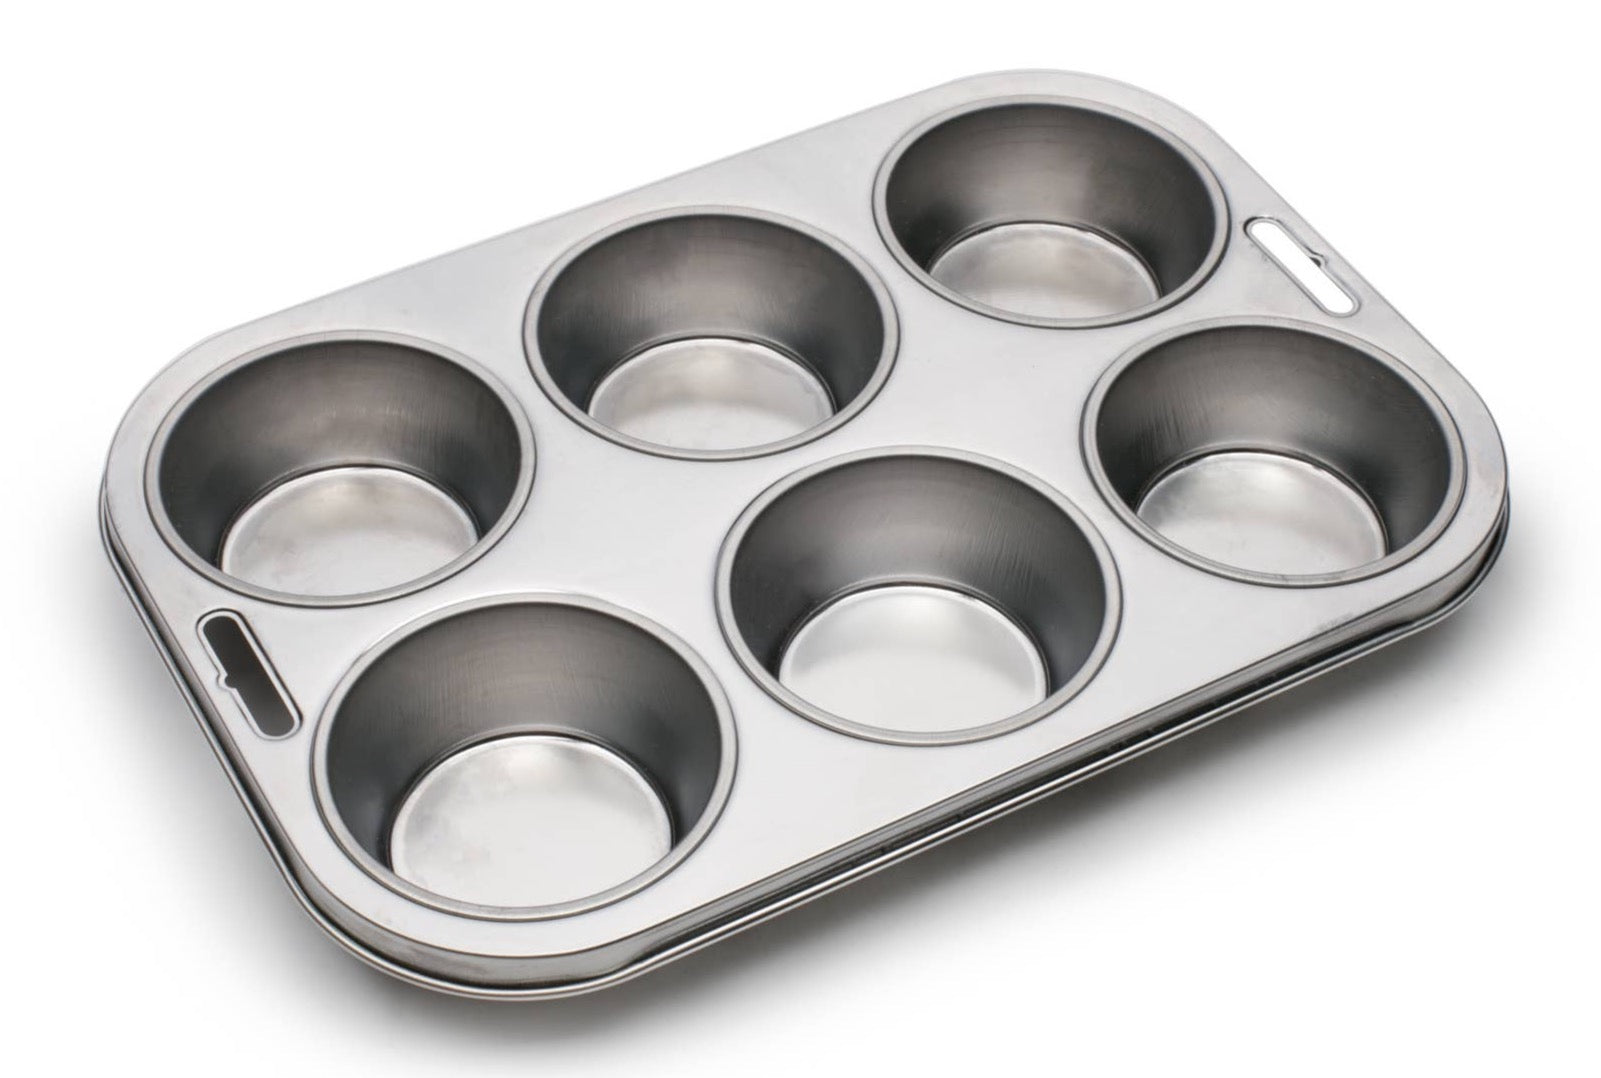 Fox Run 4868 Muffin Pan, 12 Cup, Stainless Steel